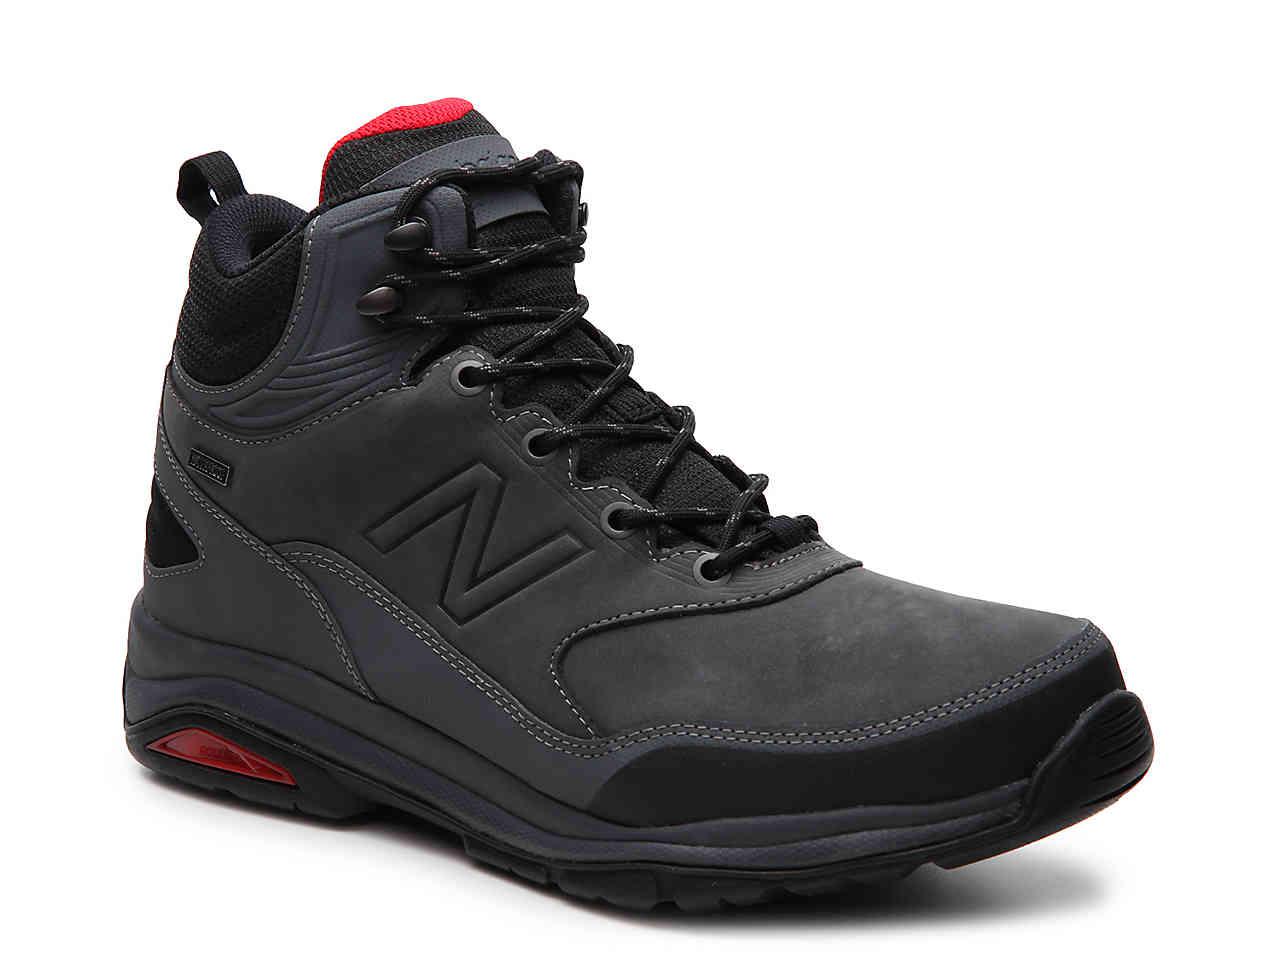 New Balance Leather 1400 Hiking Boot in Grey/Black/Red (Black) for Men